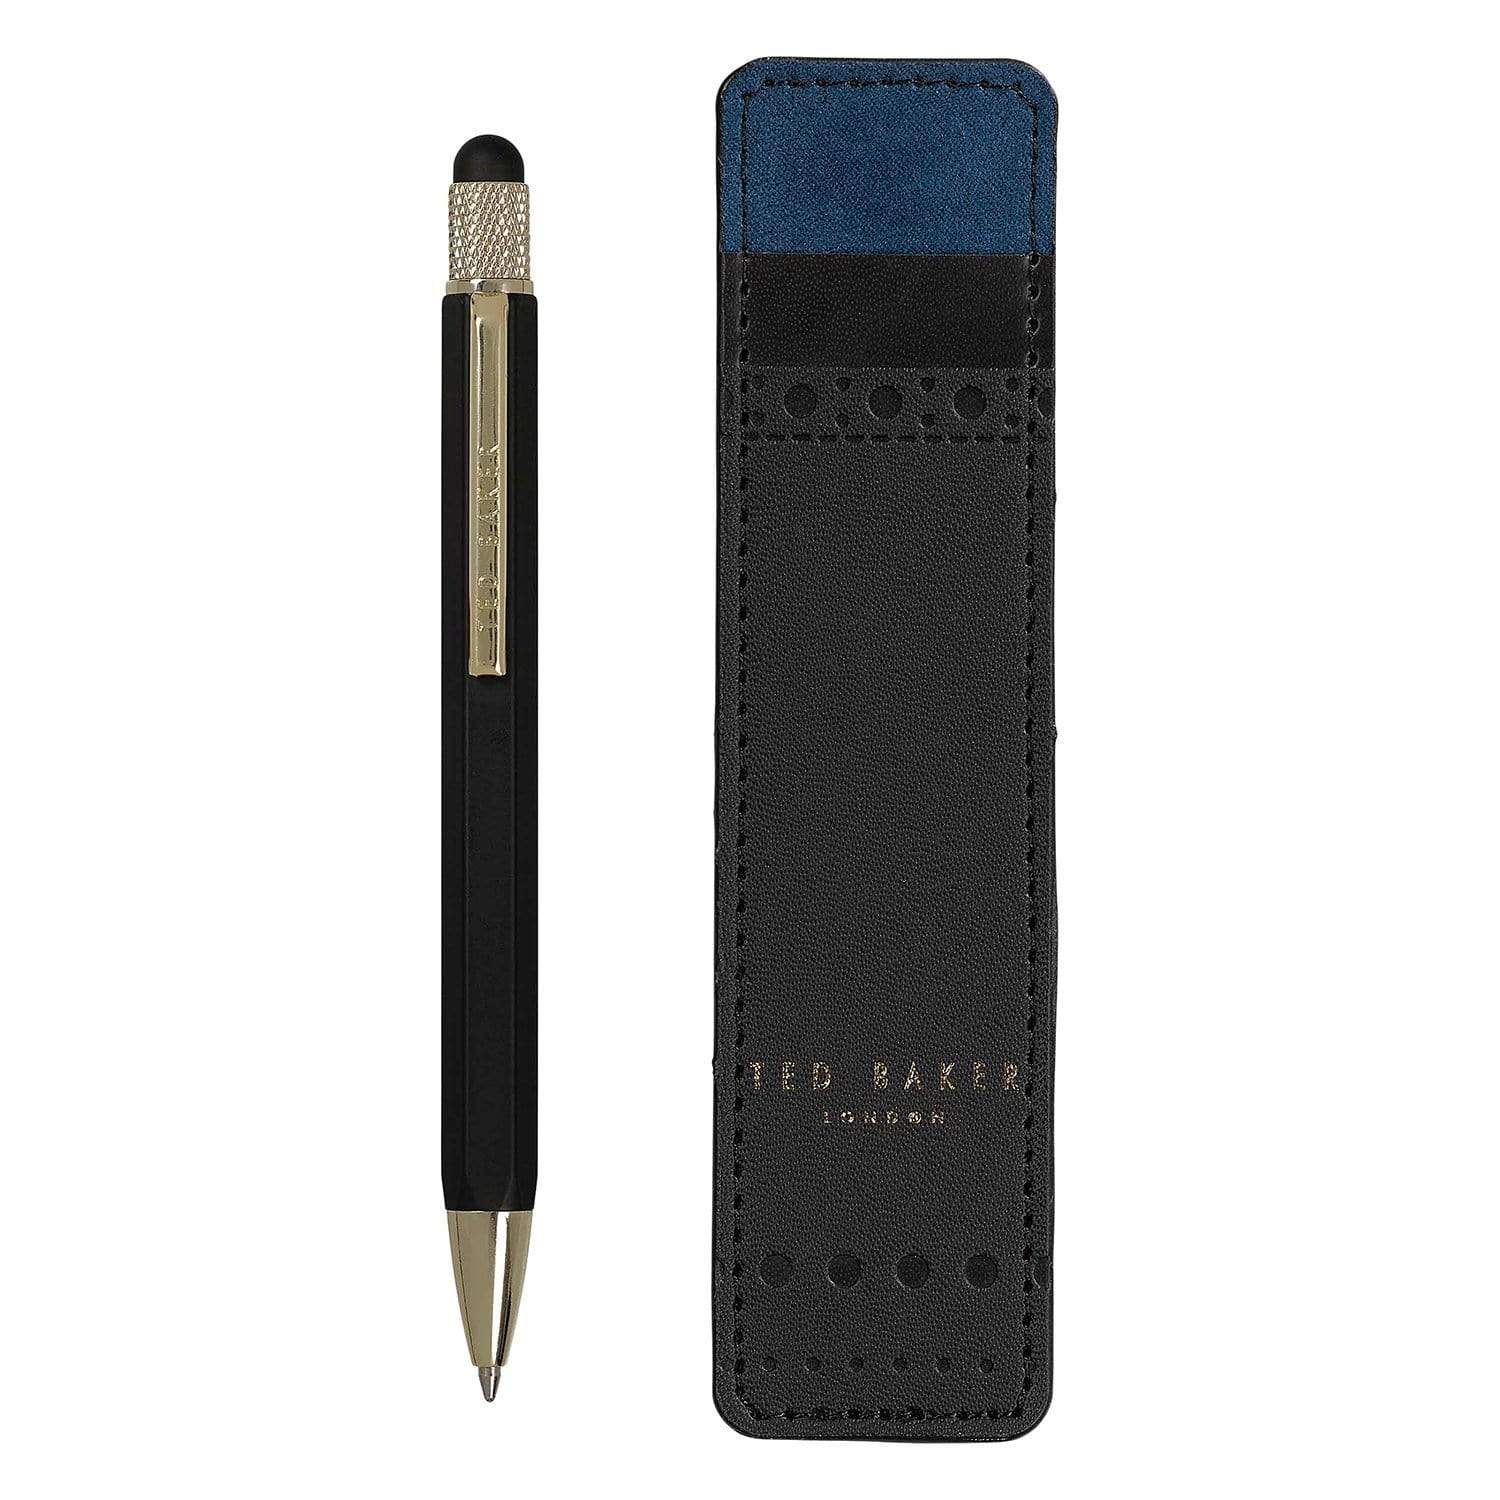 Ted Baker Monkian Touch Screen Pen - Black and Blue - TED478